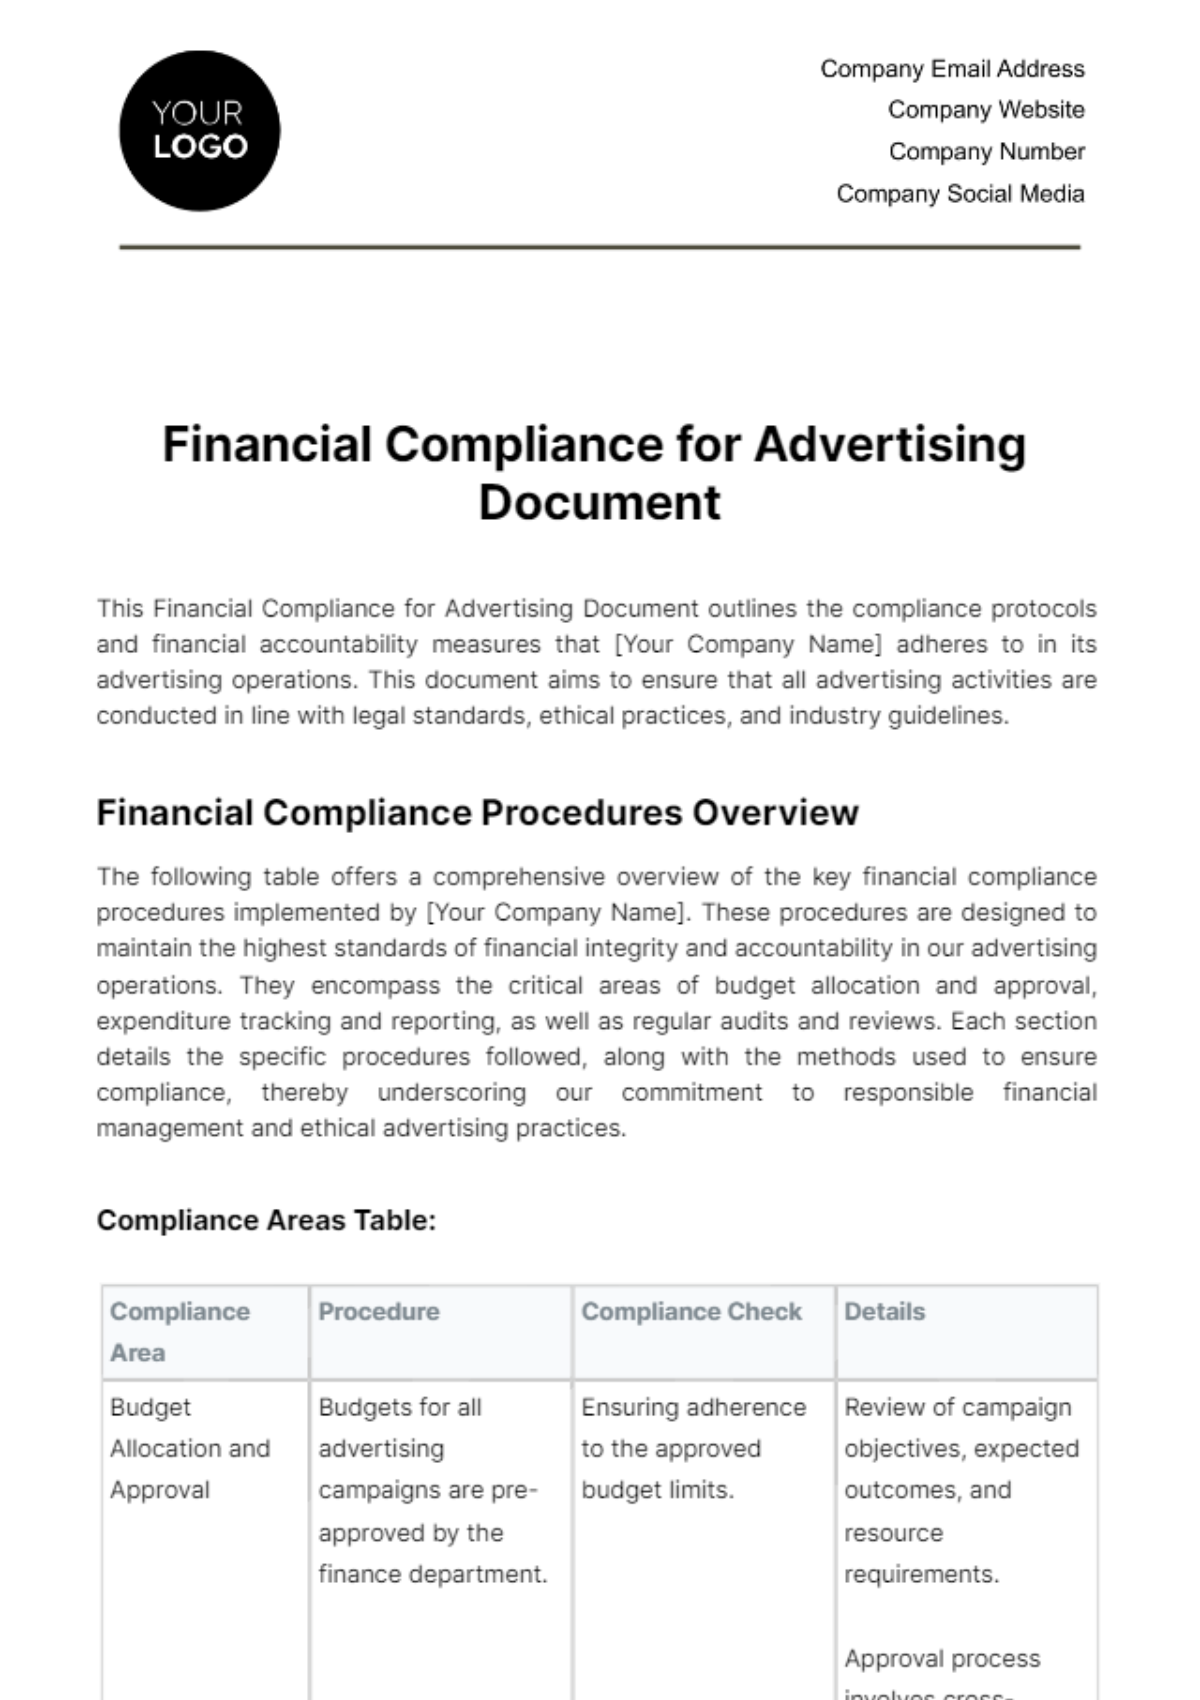 Financial Compliance for Advertising Document Template